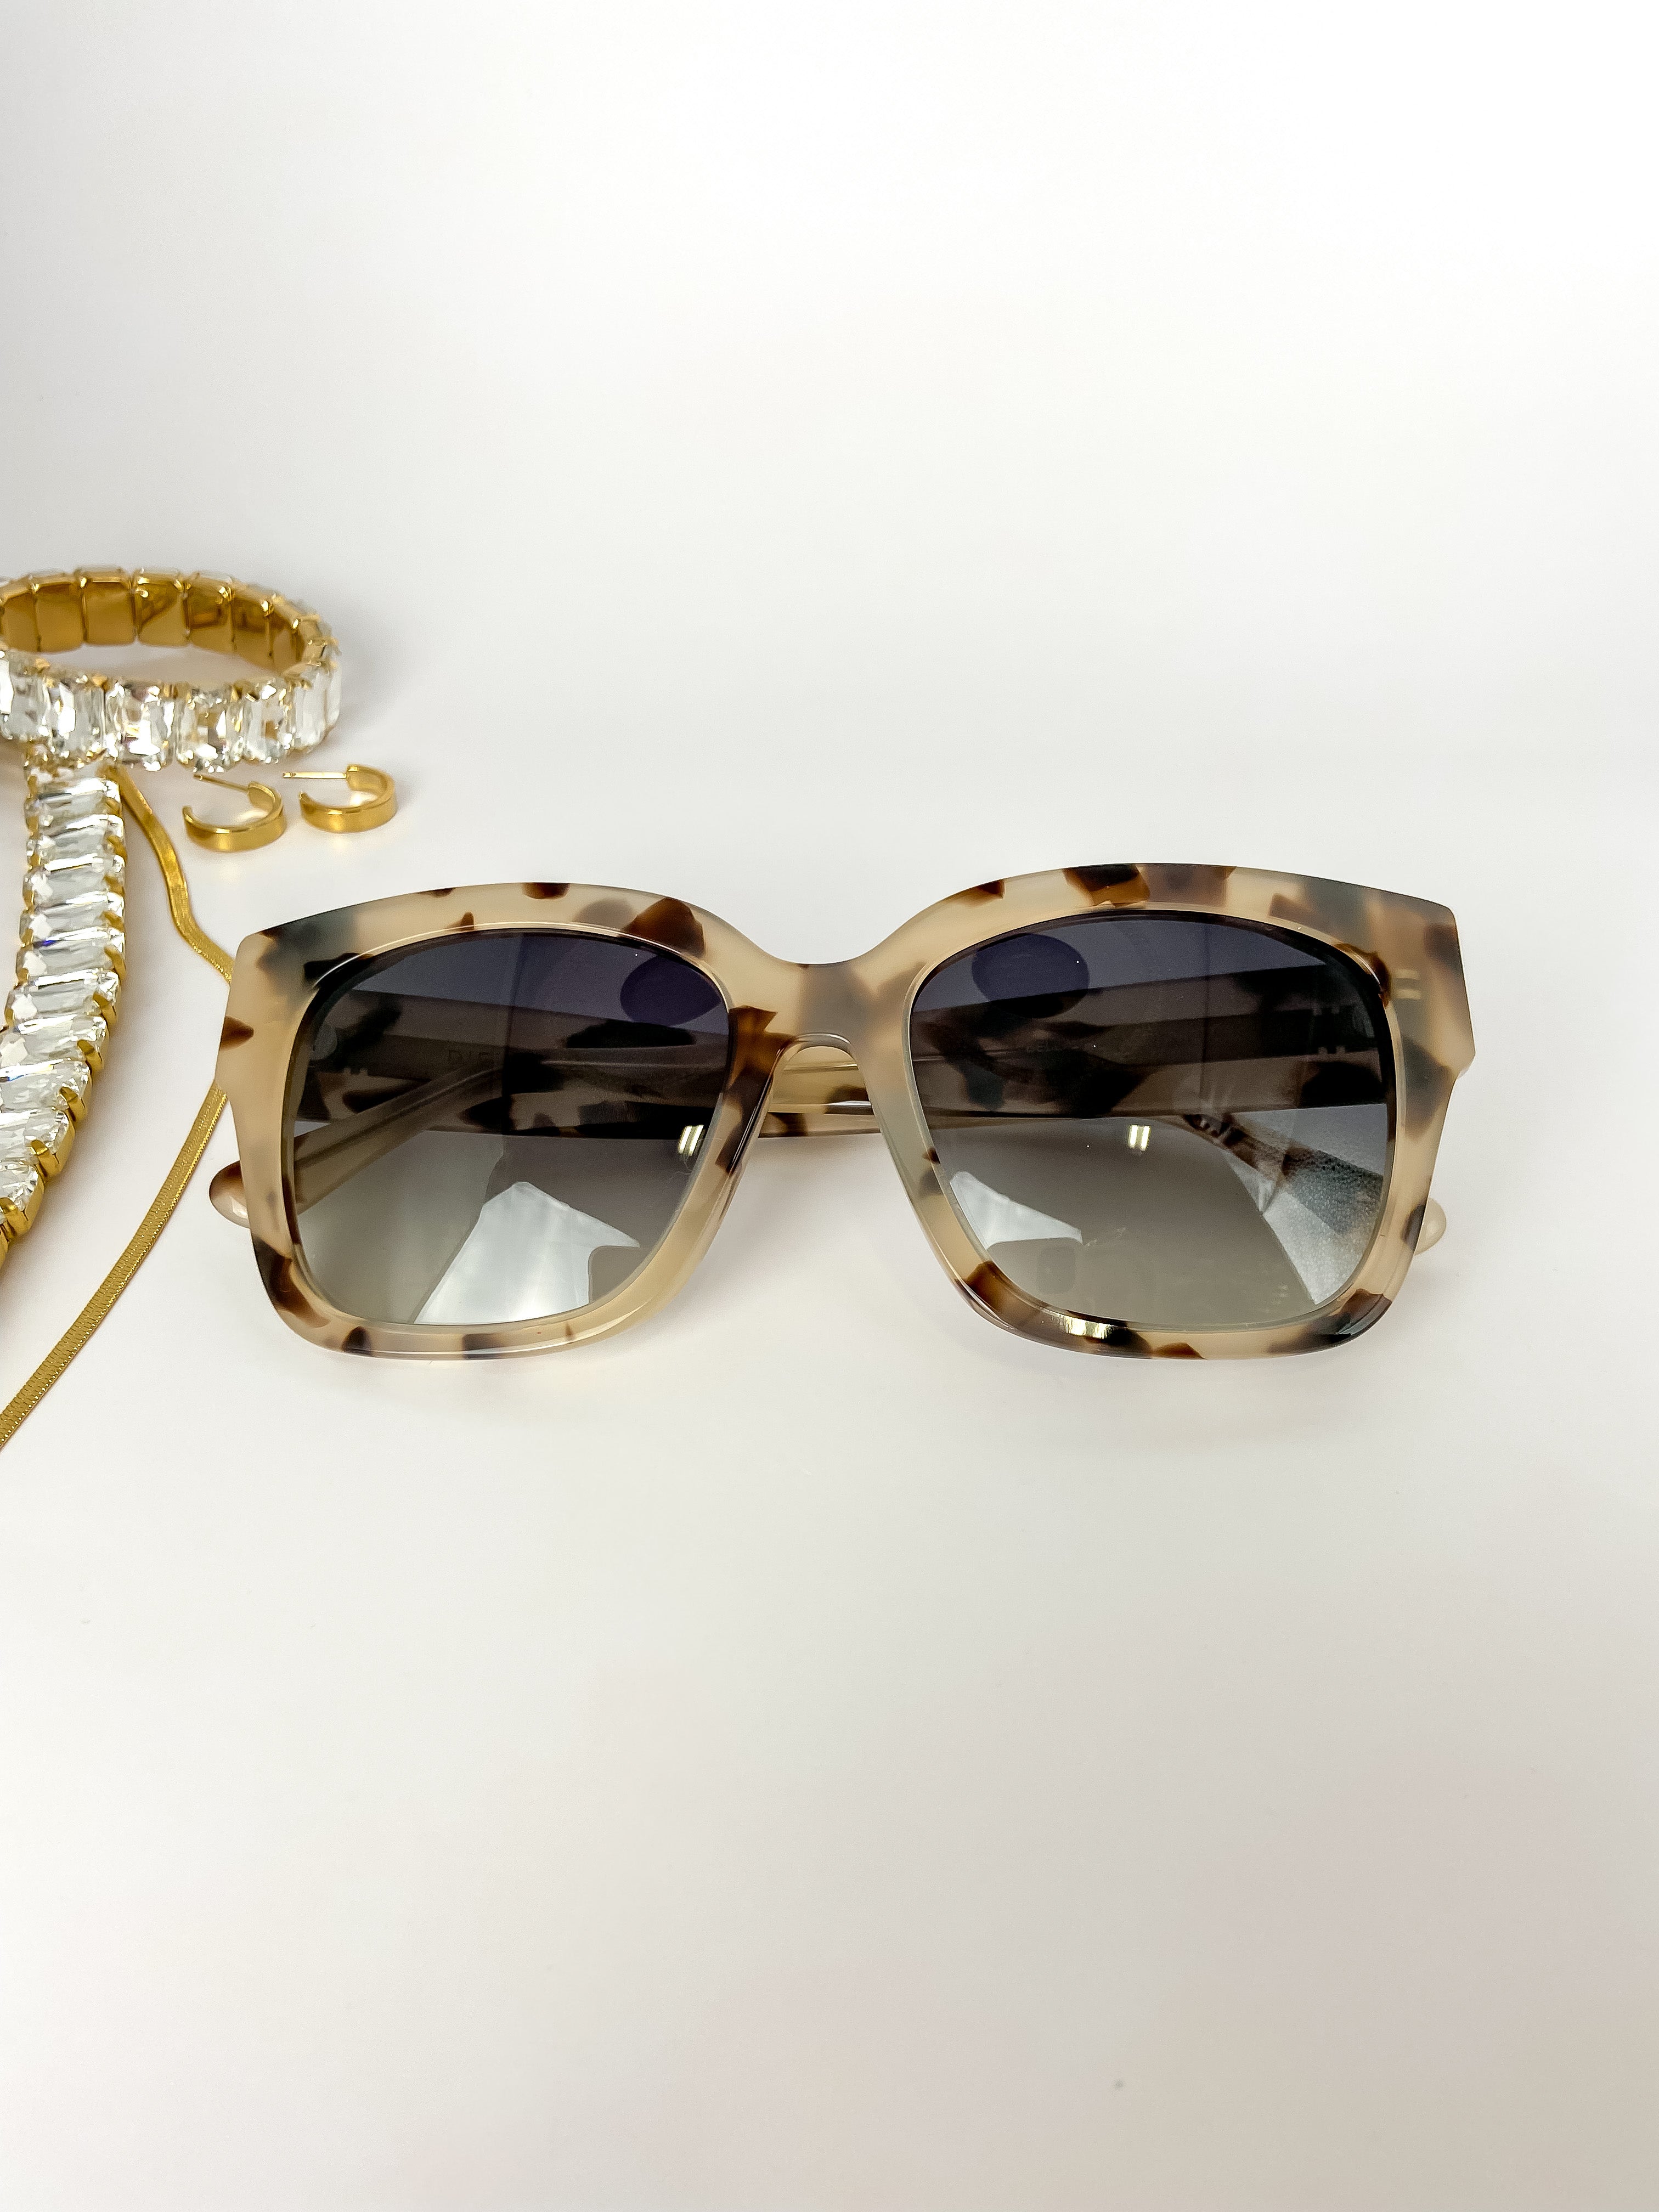 DIFF | Bella II Grey Gradient Lens Sunglasses in Cream Tortoise - Giddy Up Glamour Boutique